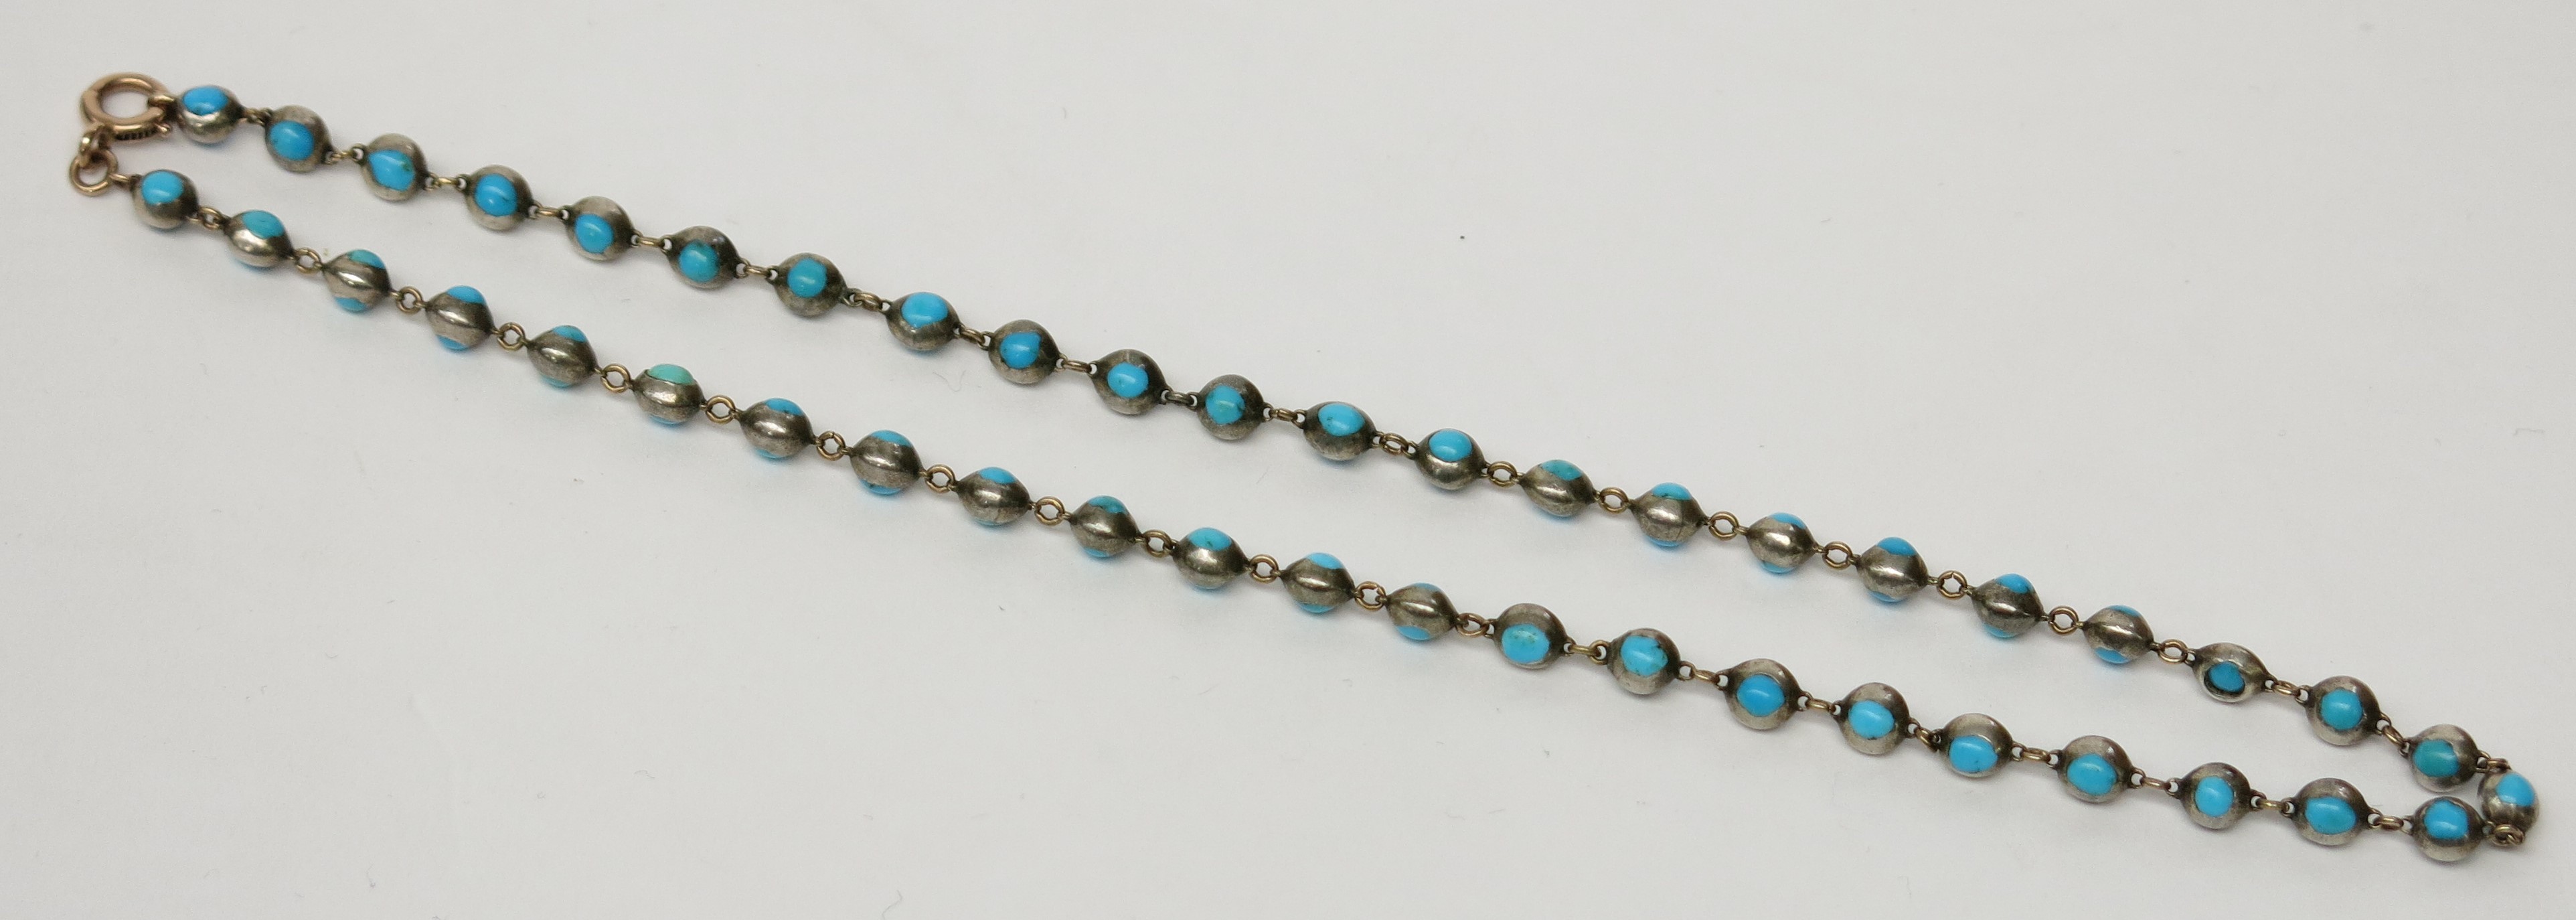 An antique necklace with turquoise set beads joined by gold links.